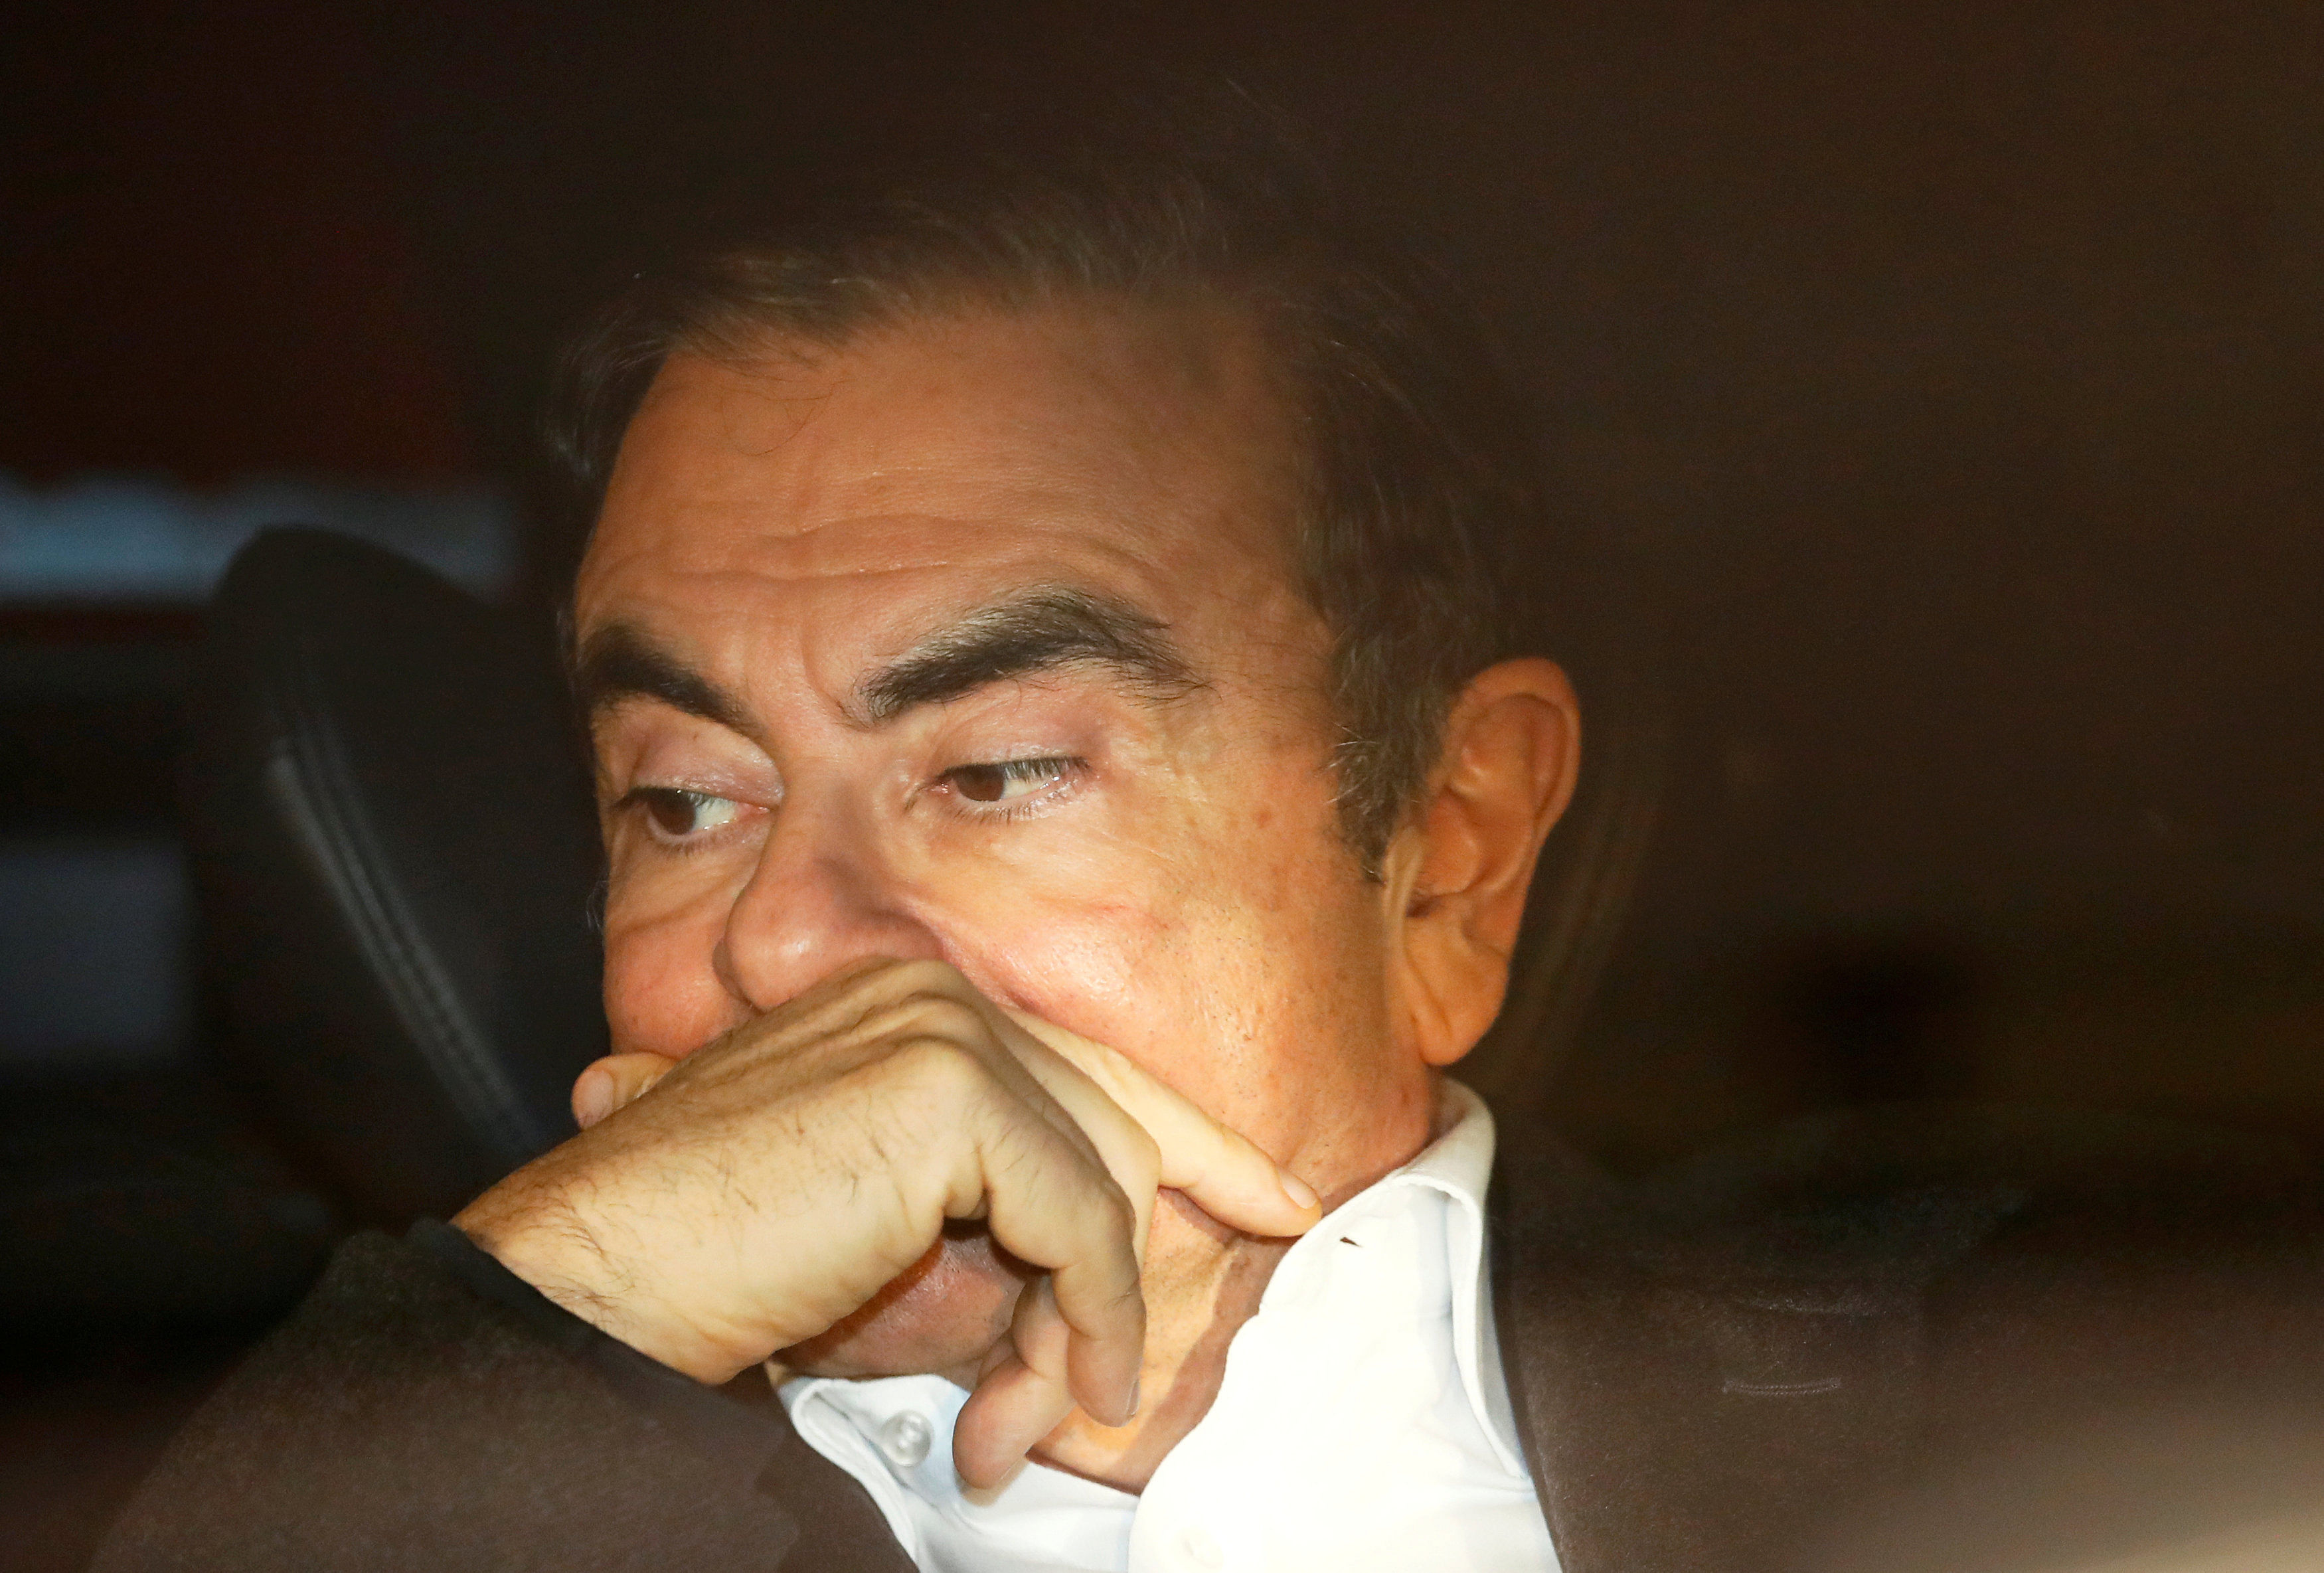 Former Nissan Motor Chairman Carlos Ghosn sits inside a car as he leaves his lawyer's office after being released on bail from Tokyo Detention House, in Tokyo, Japan. (Reuters Photo)